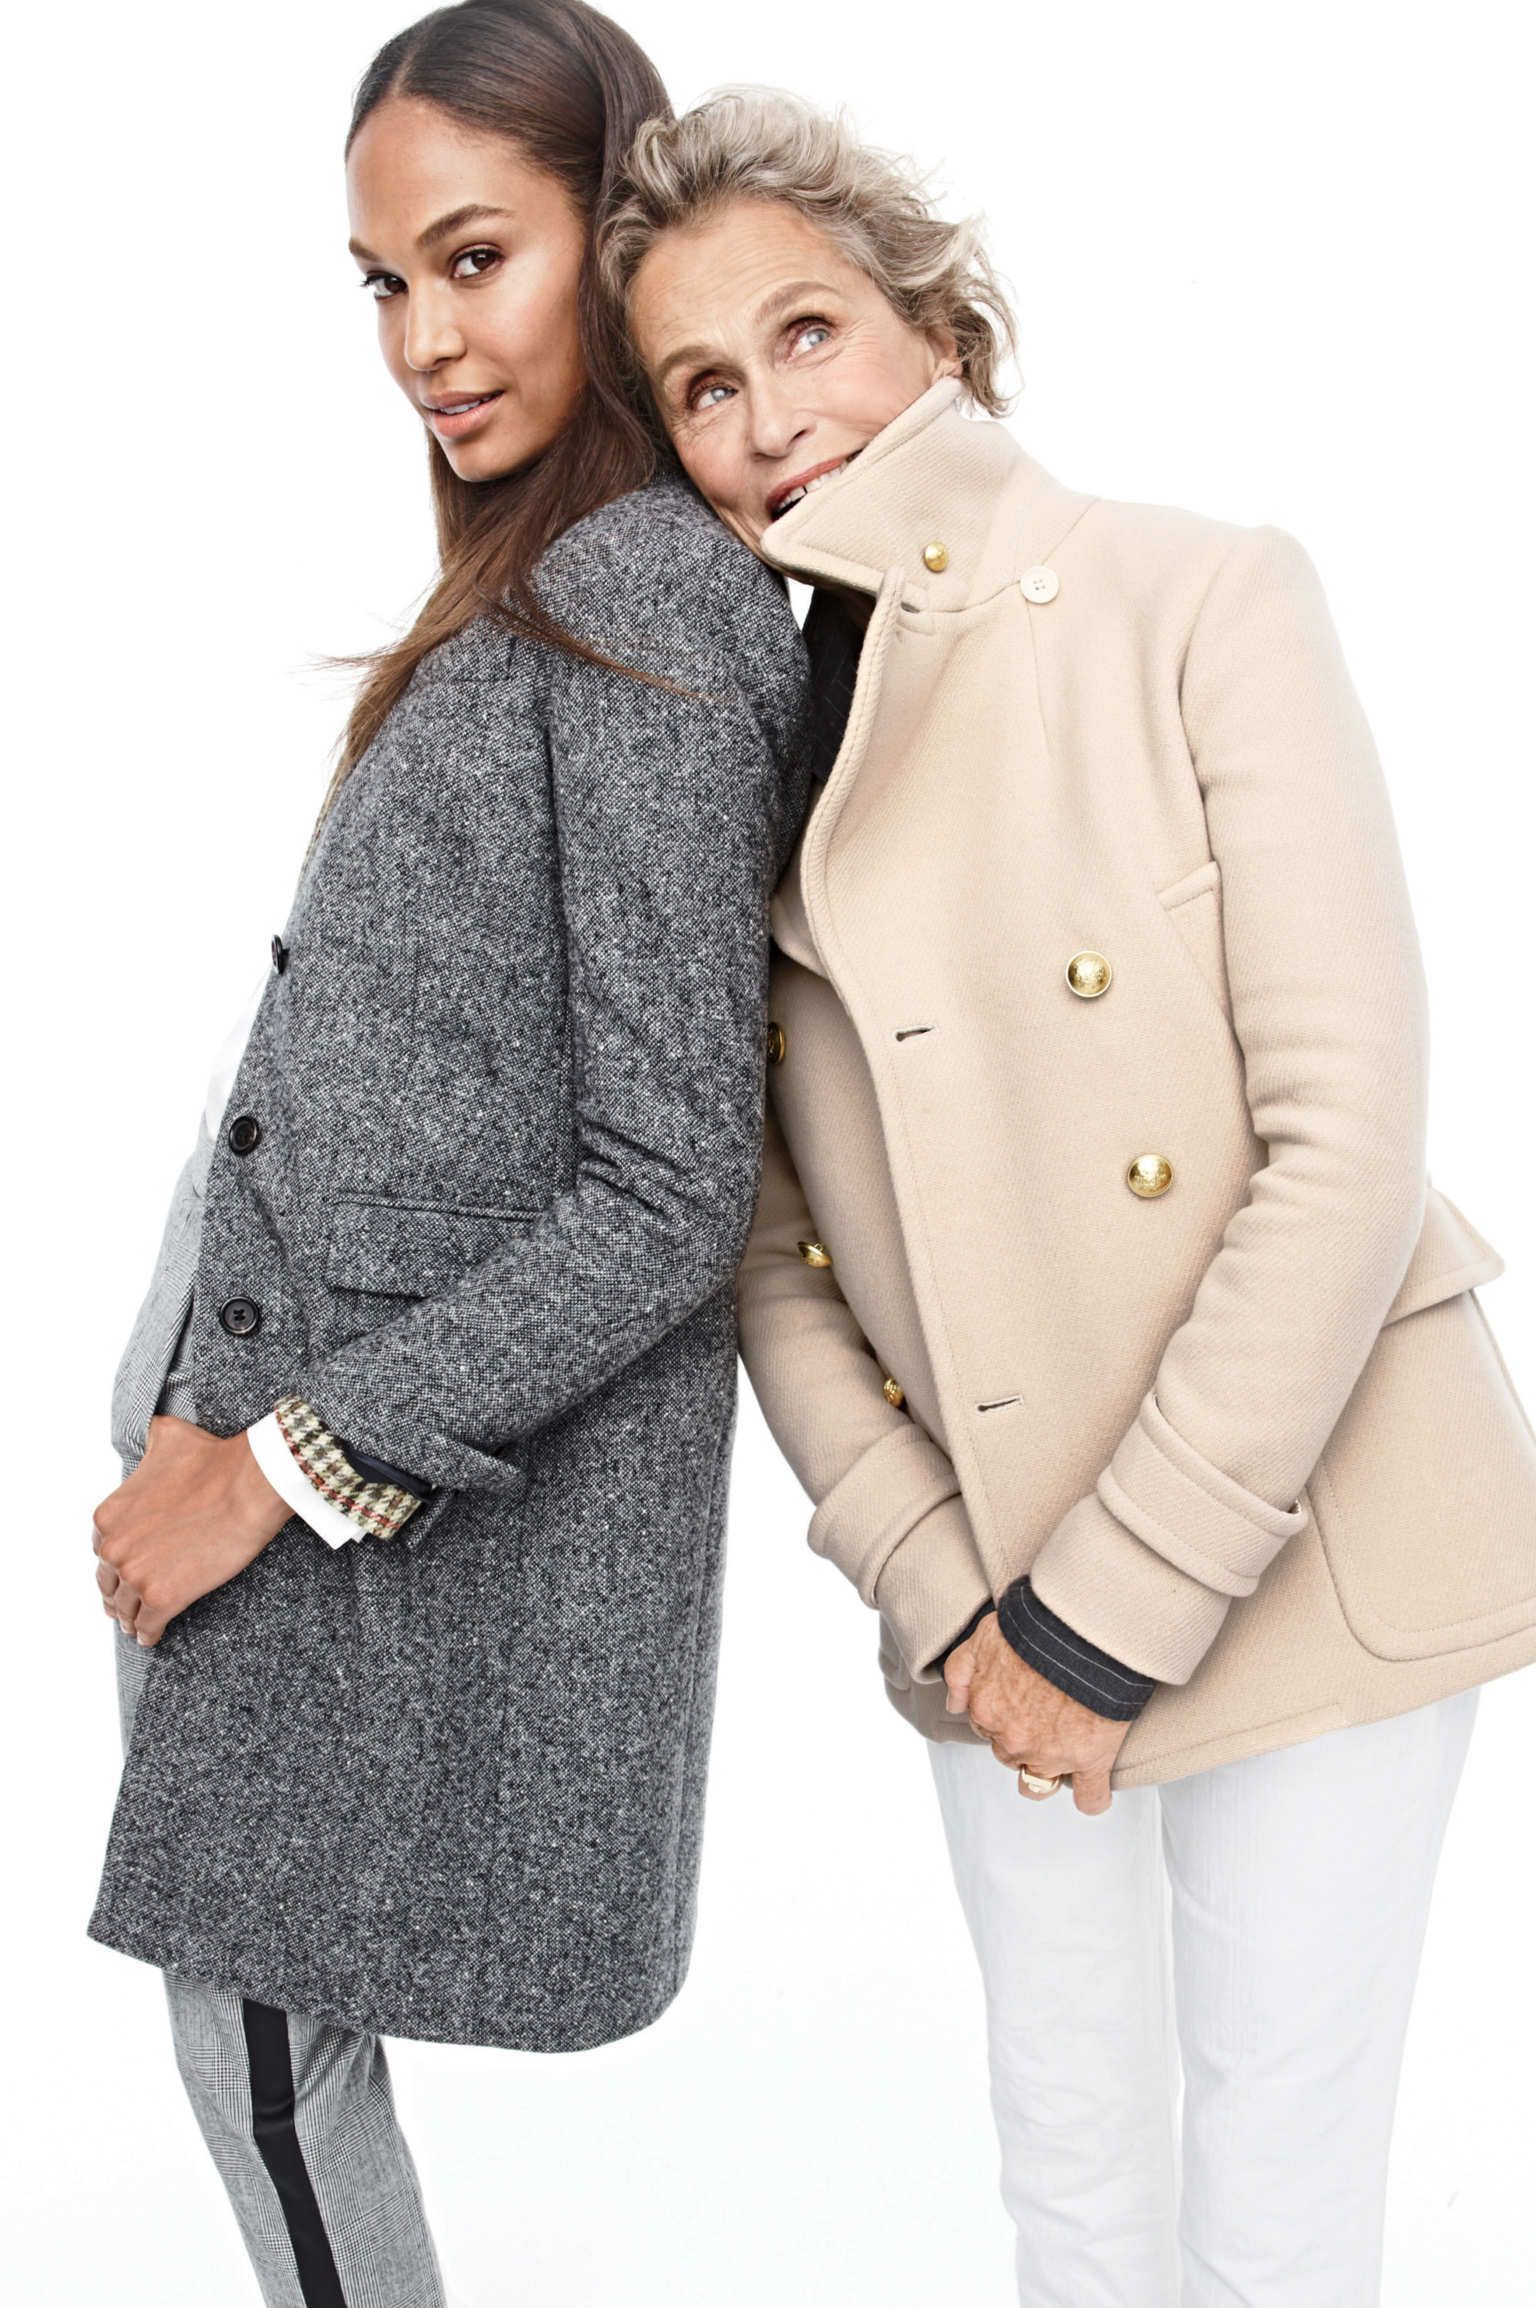 See All the Supermodels in J.Crew's Style Guide - See All the Supermodels in J.Crew's Style Guide -   23 style Guides winter ideas